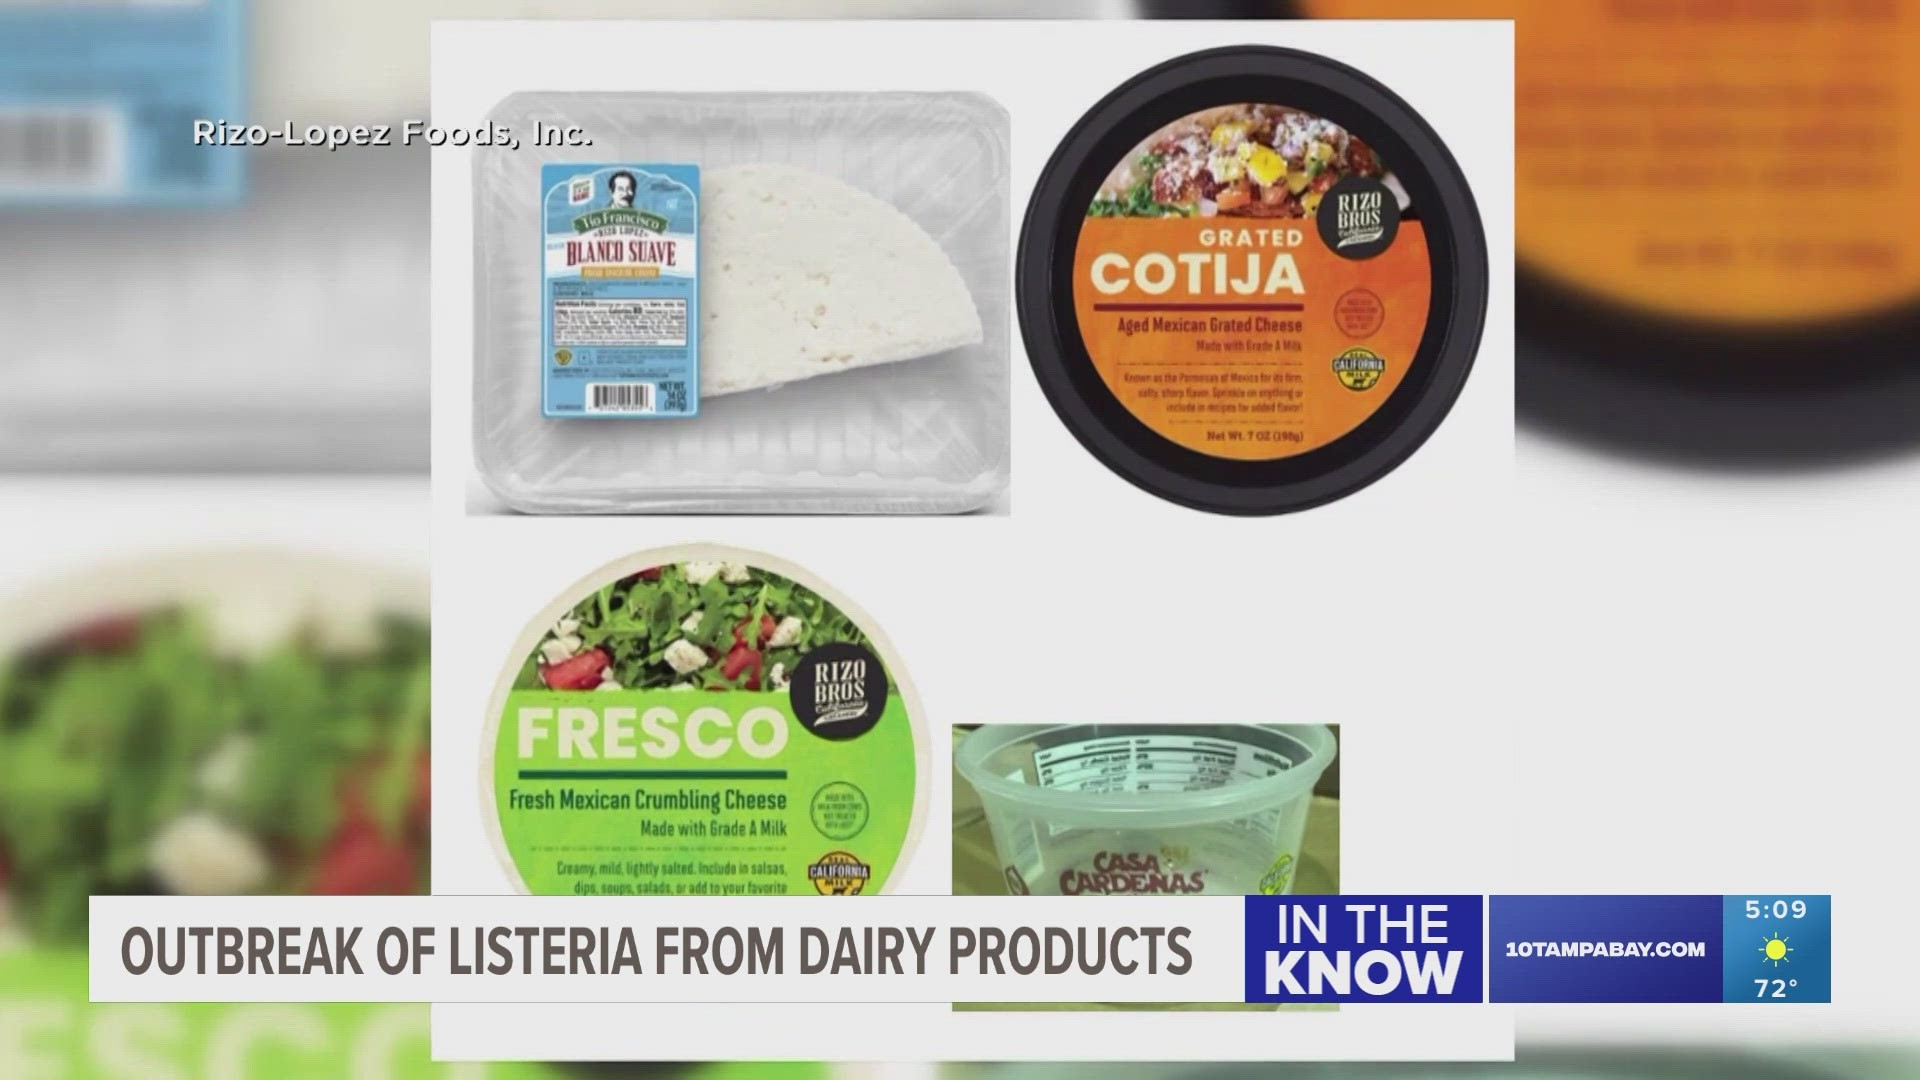 The recall covers more than 60 soft cheeses, yogurt and sour cream sold under several brands including Tio Francisco, Food City and 365 Whole Foods Market.